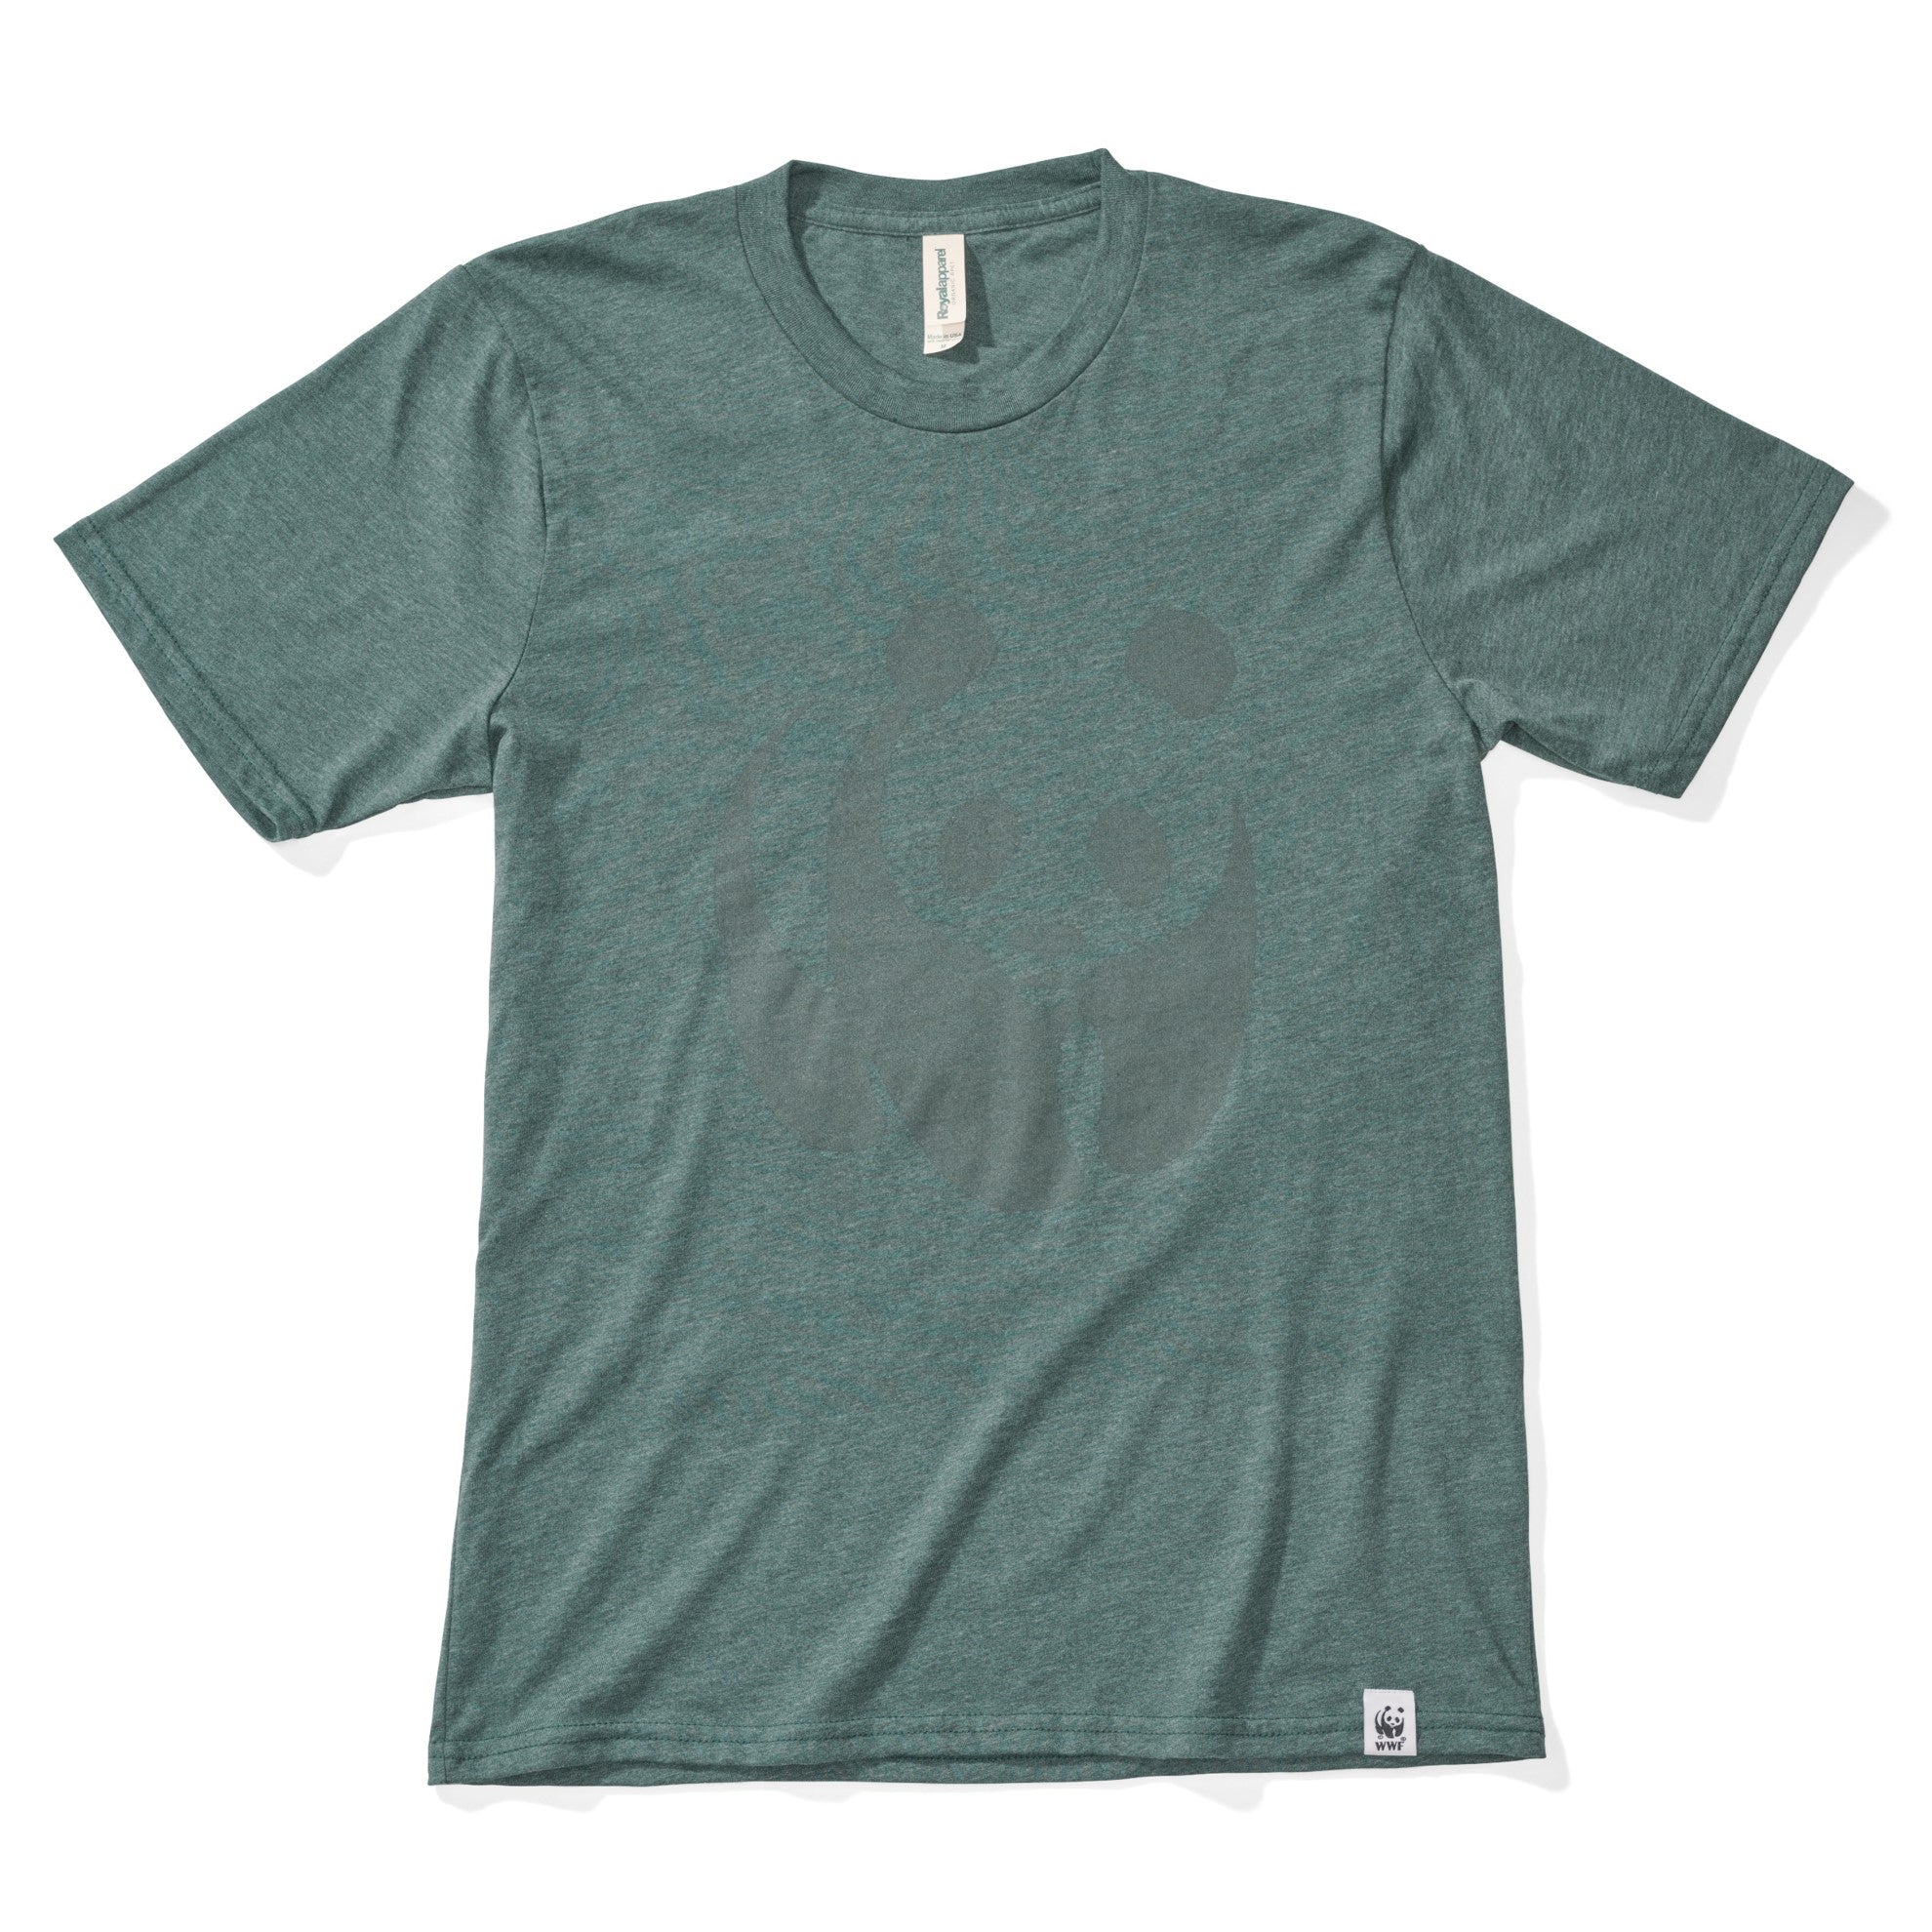 A photo of a green t-shirt with an imprint of the WWF panda logo